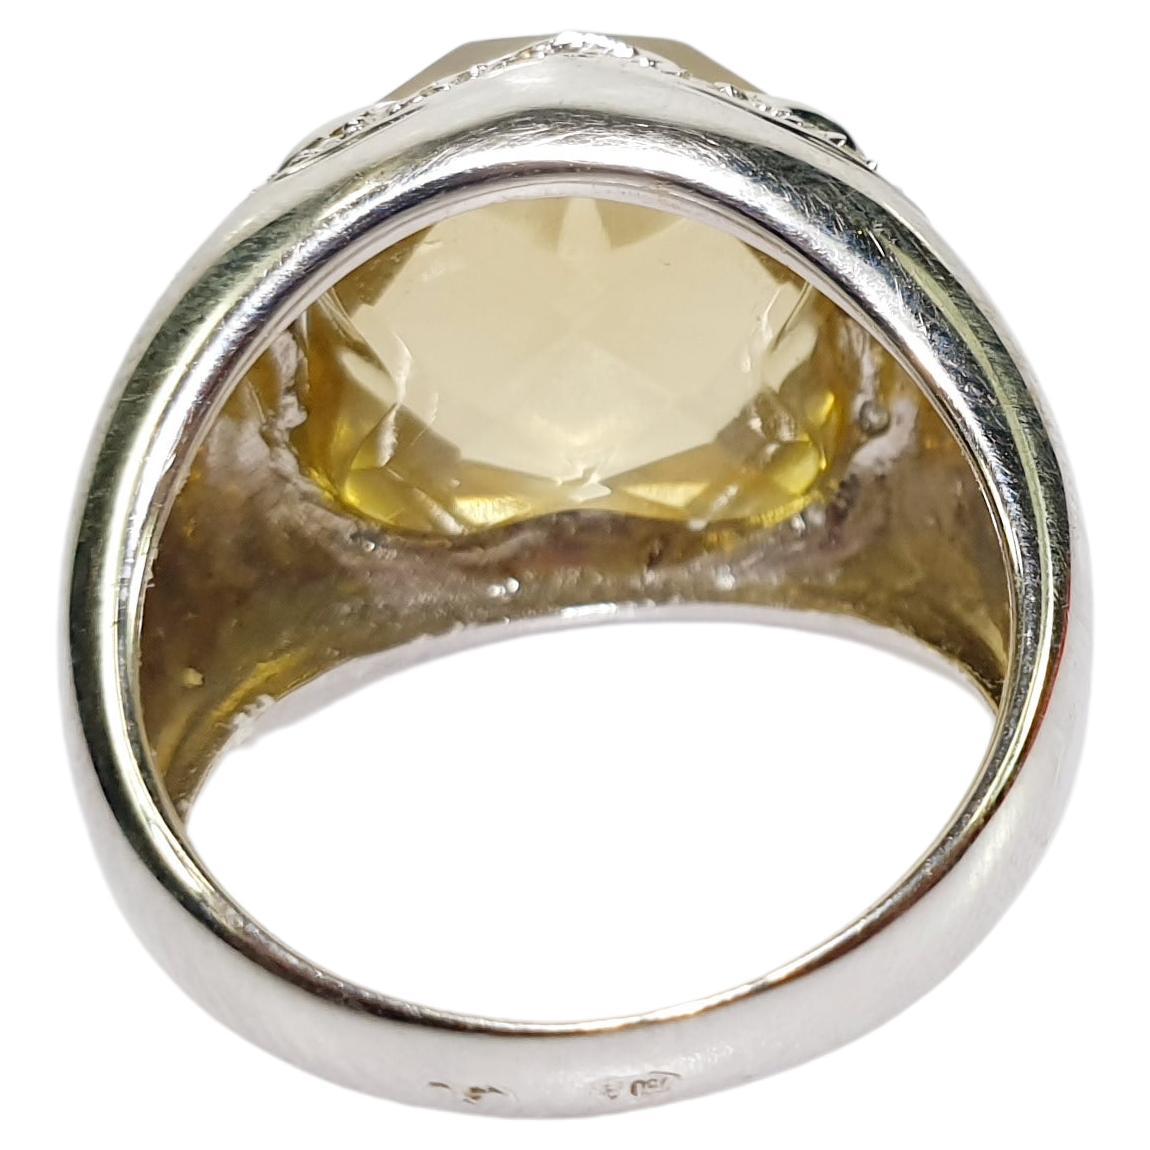 Bombe Ring Lemmon Citrine Quartz with fringe  of Diamonds in 18k white gold 

MATERIAL
◘ White Diamonds 0.10ct 
◘ Size 54 europe, US 6/7 

READY TO SHIP
*Shipment of this piece is not affected by COVID-19. Orders welcome!

PRADERA is a  second